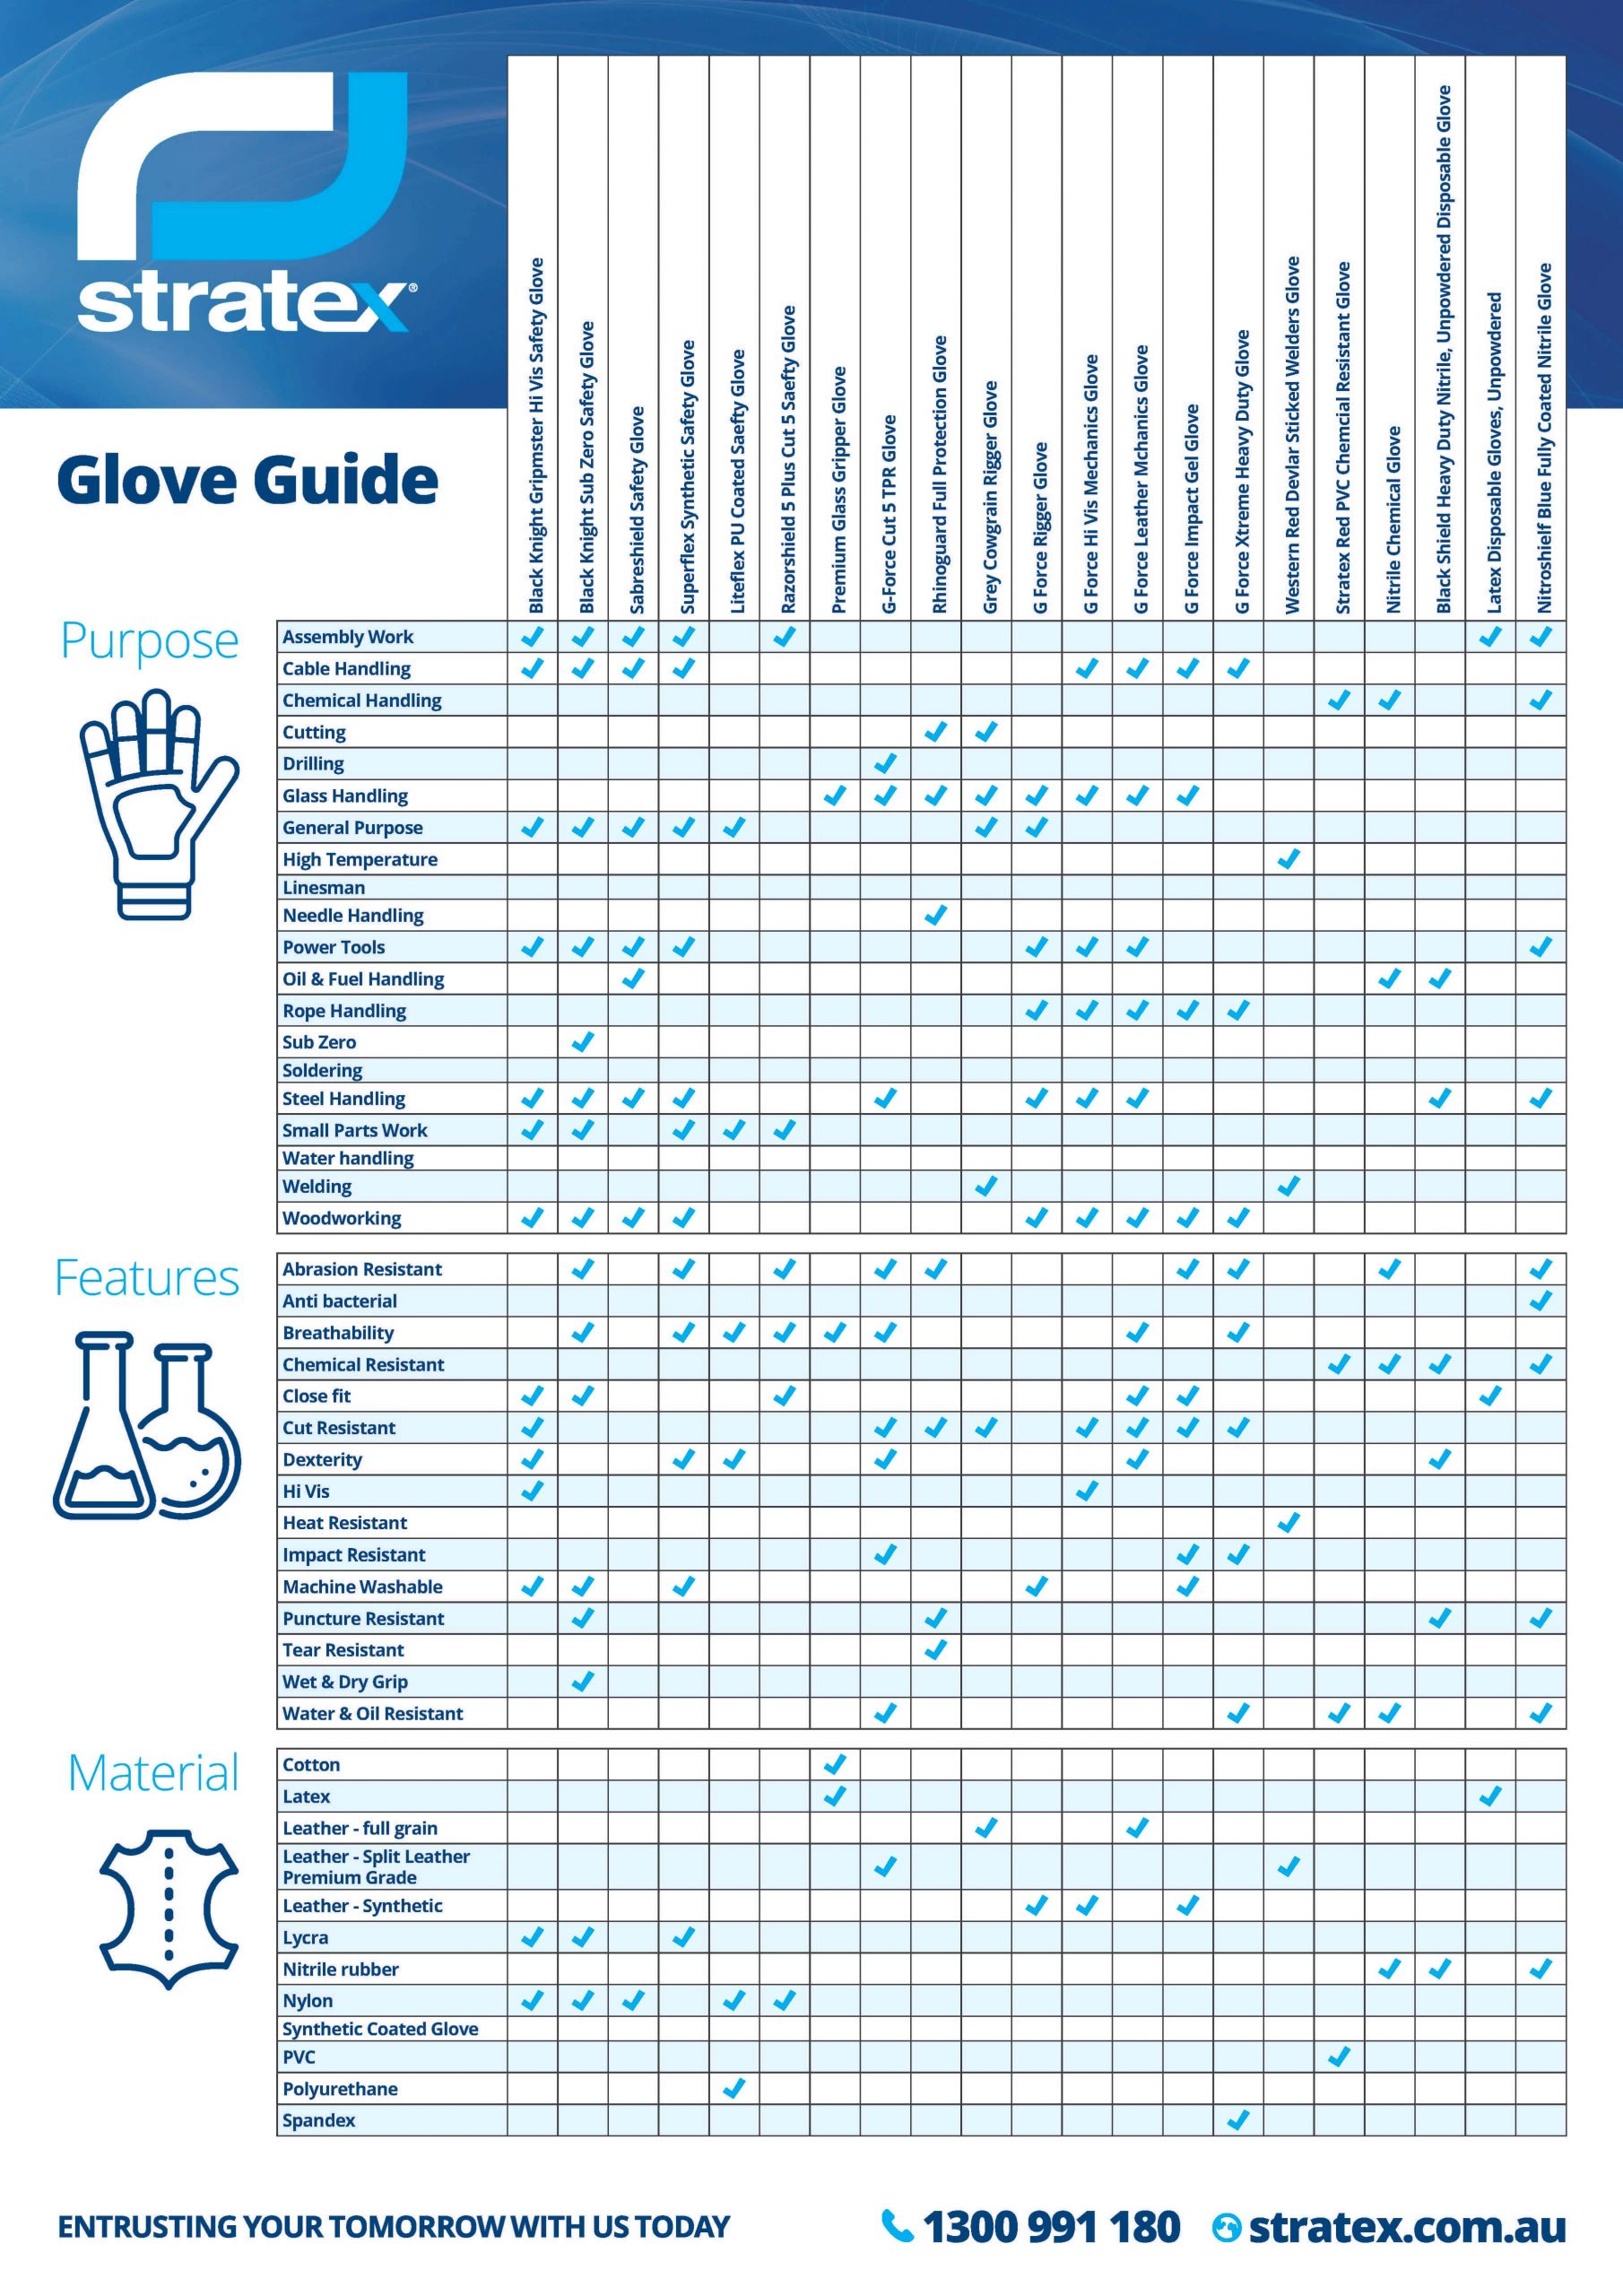 Stratex Glove Guide Infographic